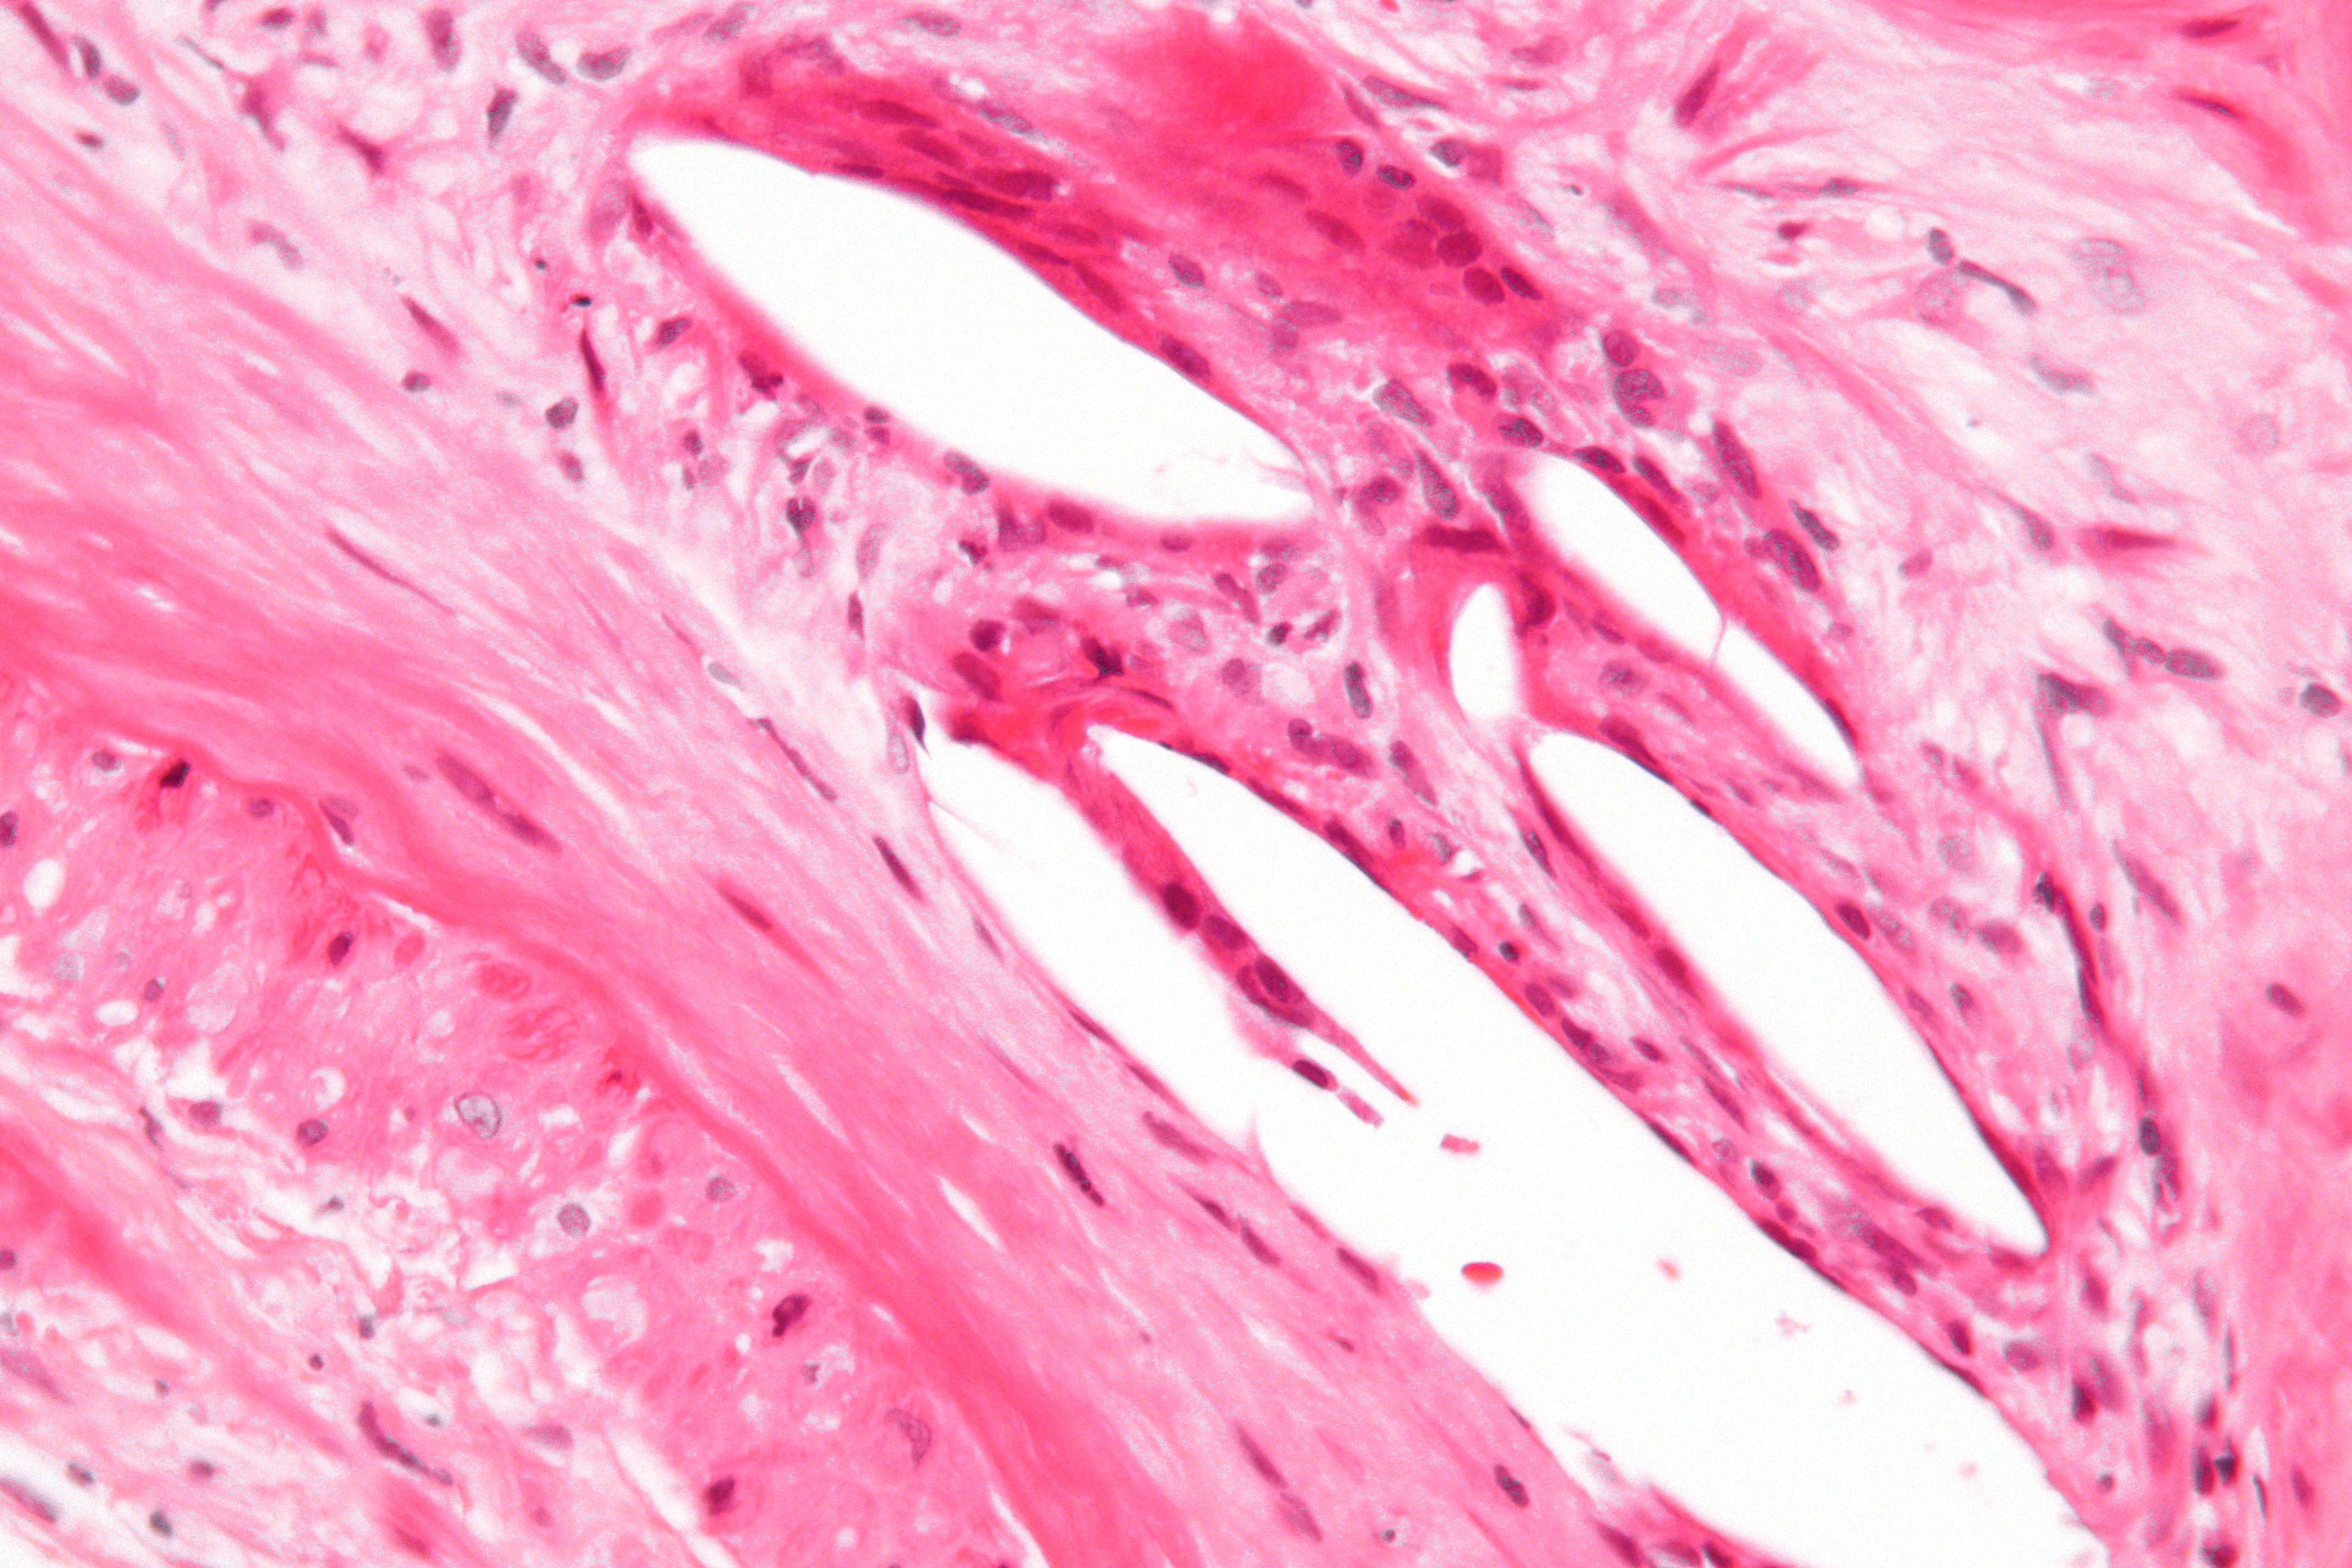 an example of connective tissue